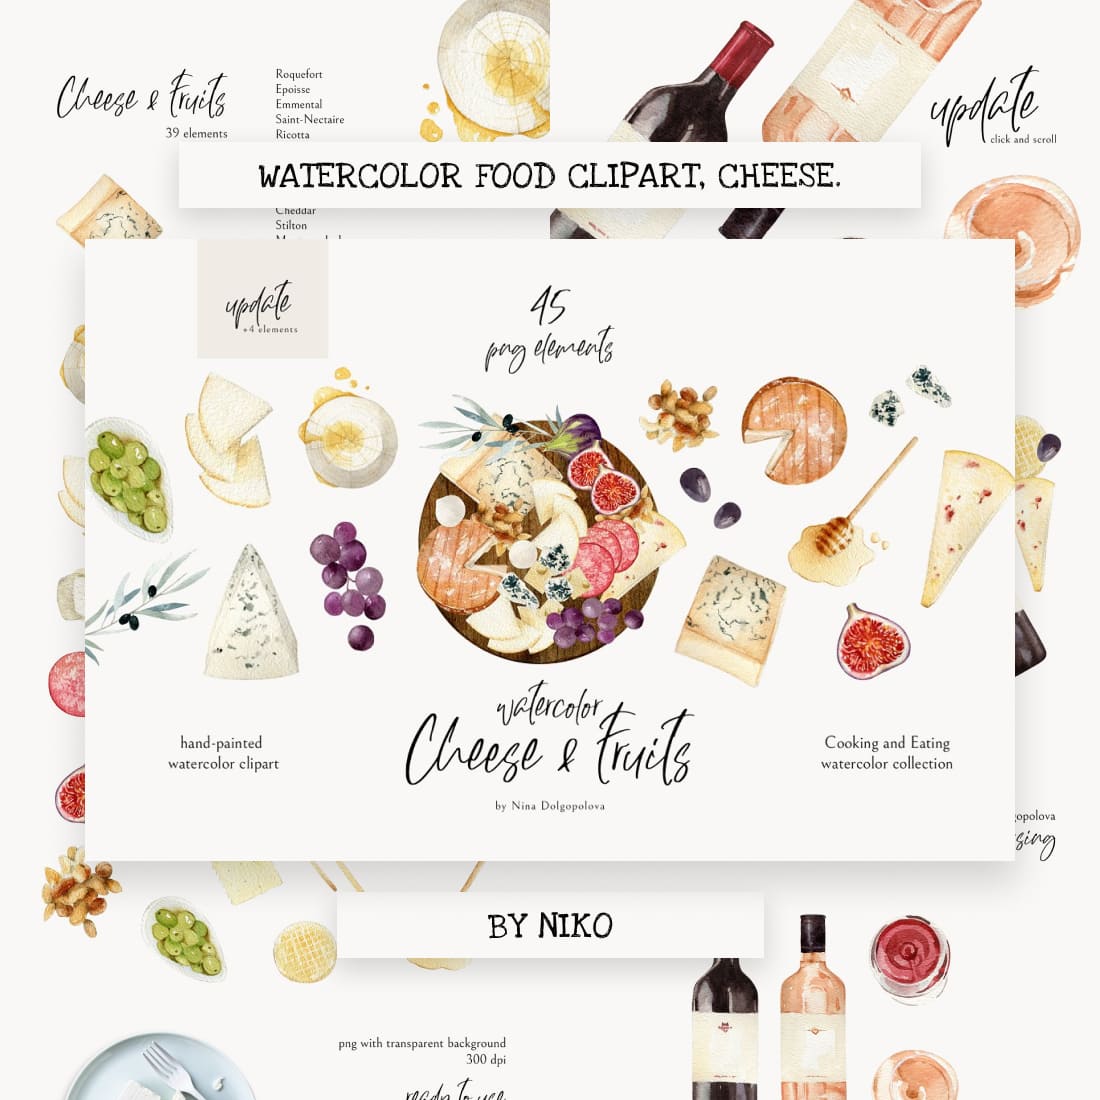 Watercolor food clipart cheese main cover.